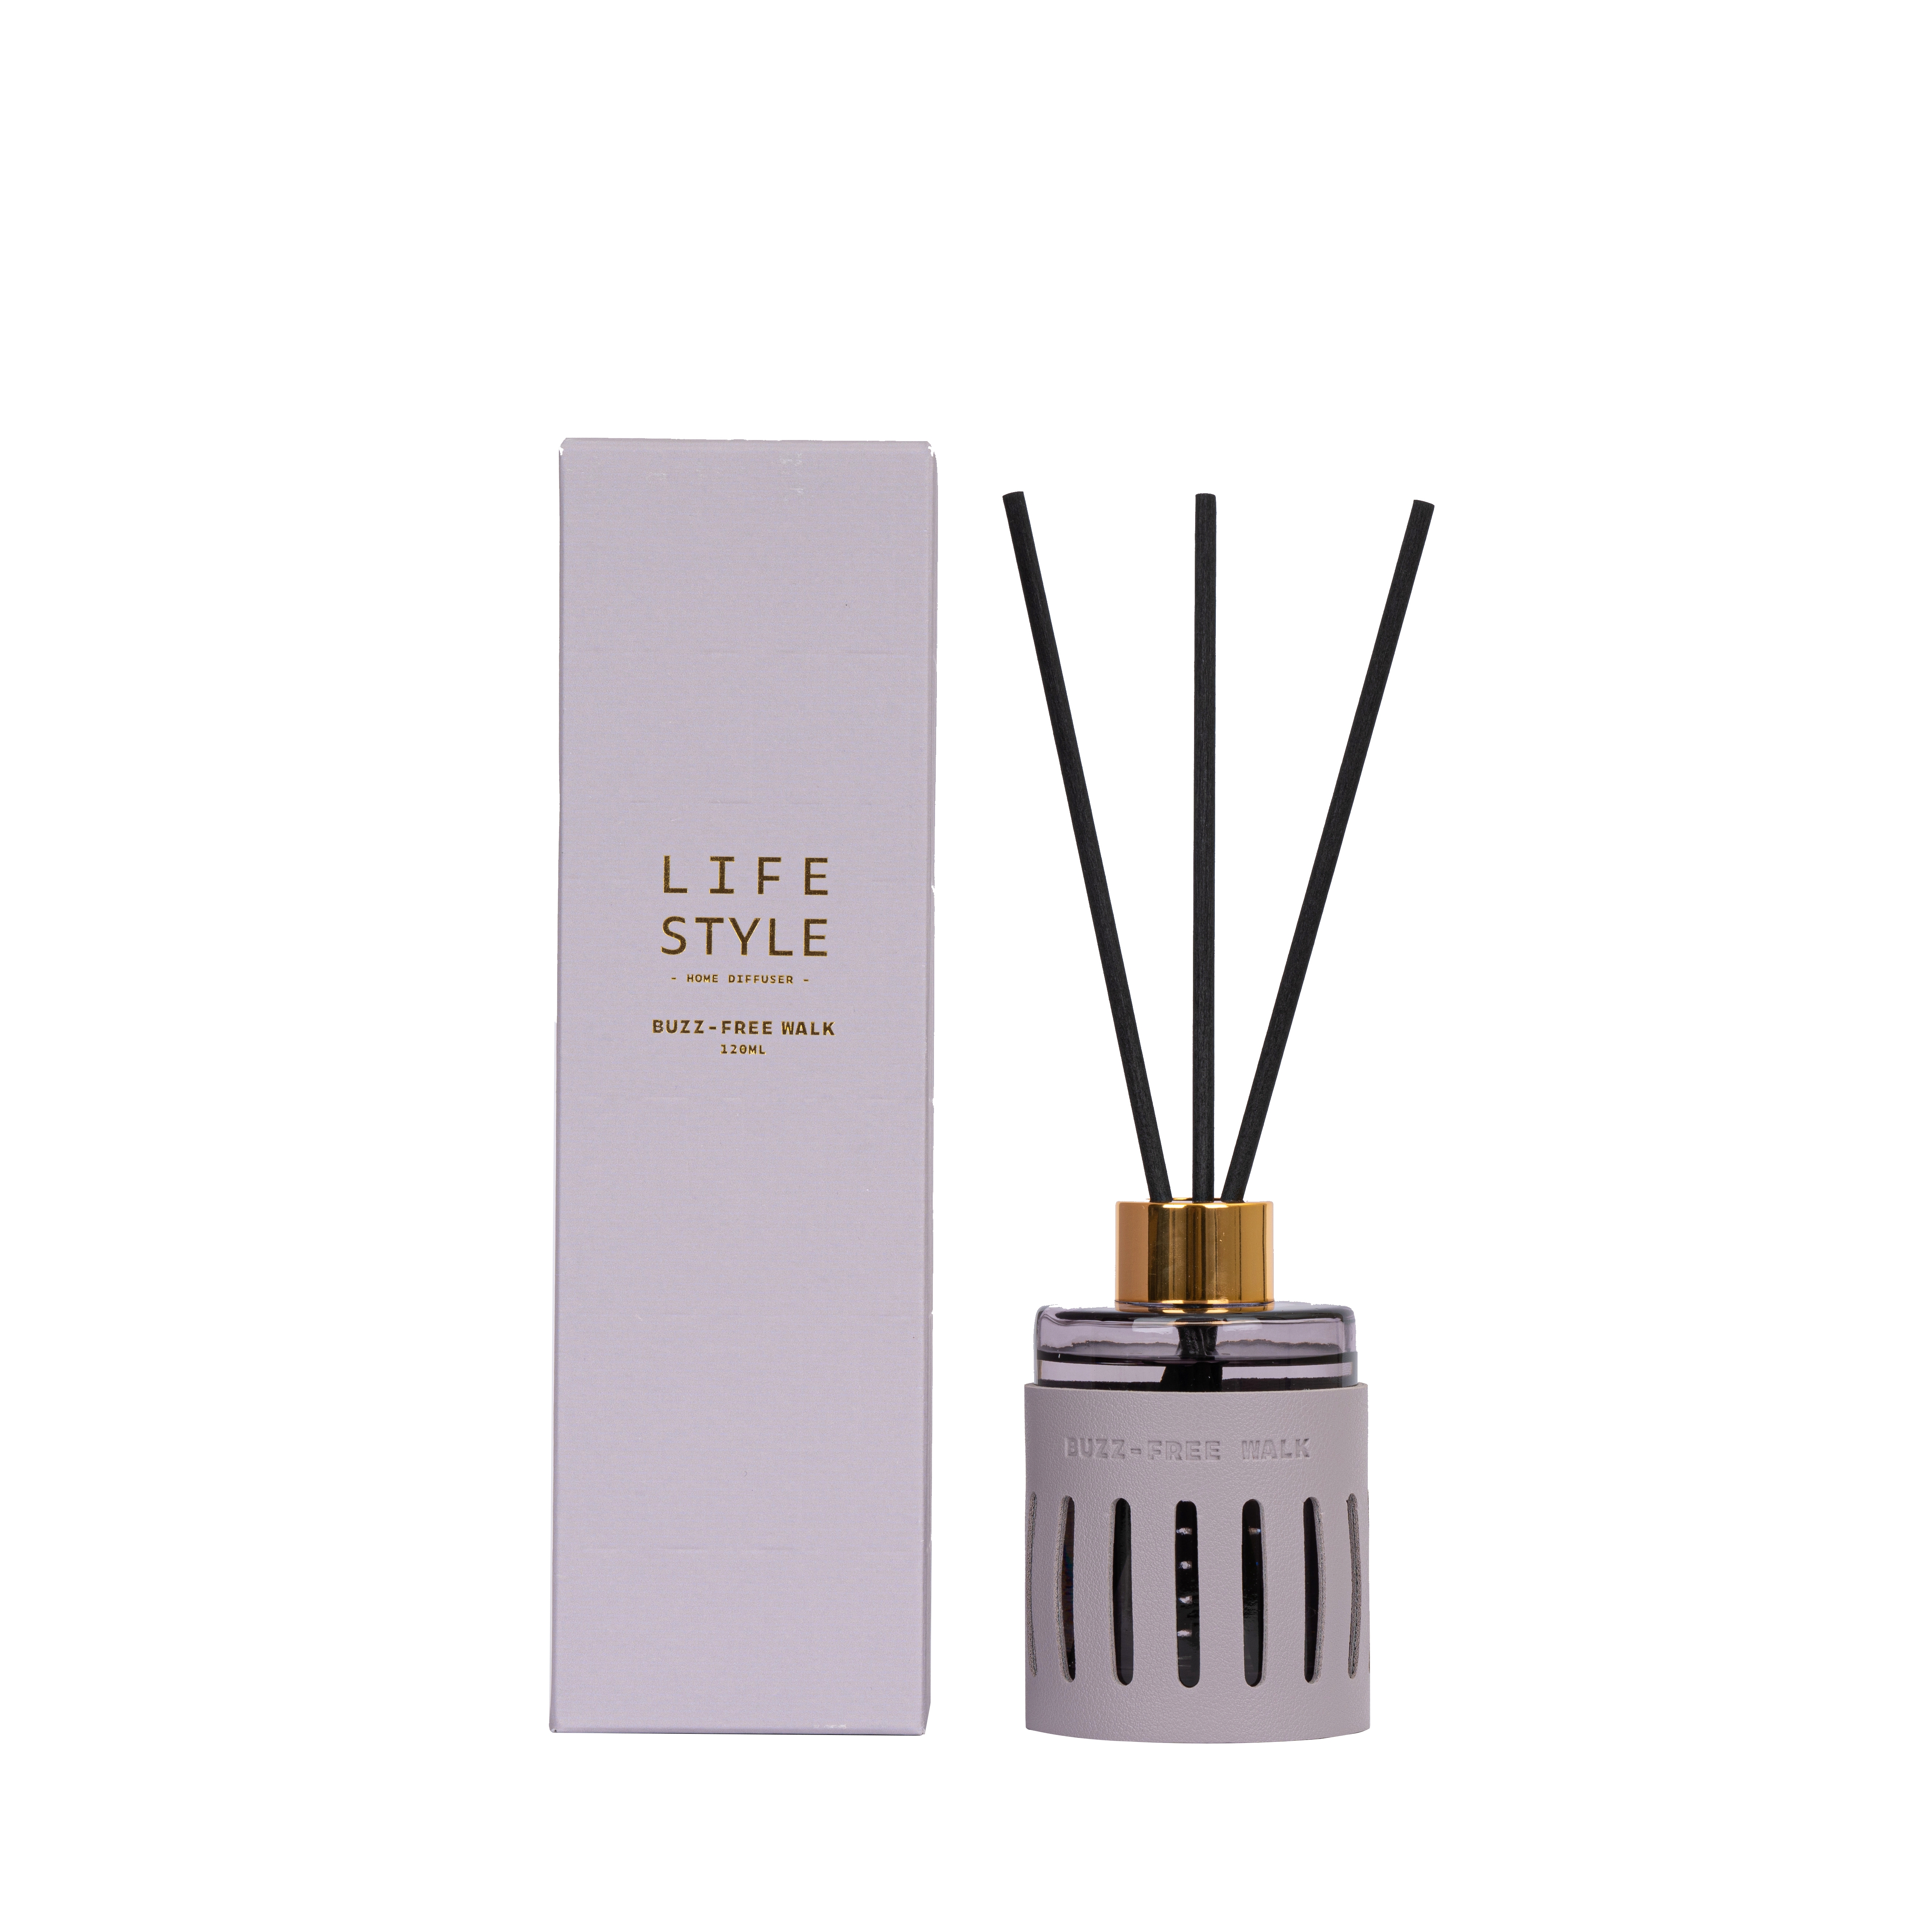 Leather 2022 Series Buzz-Free Walk 120ml Lavender Reed Diffuser